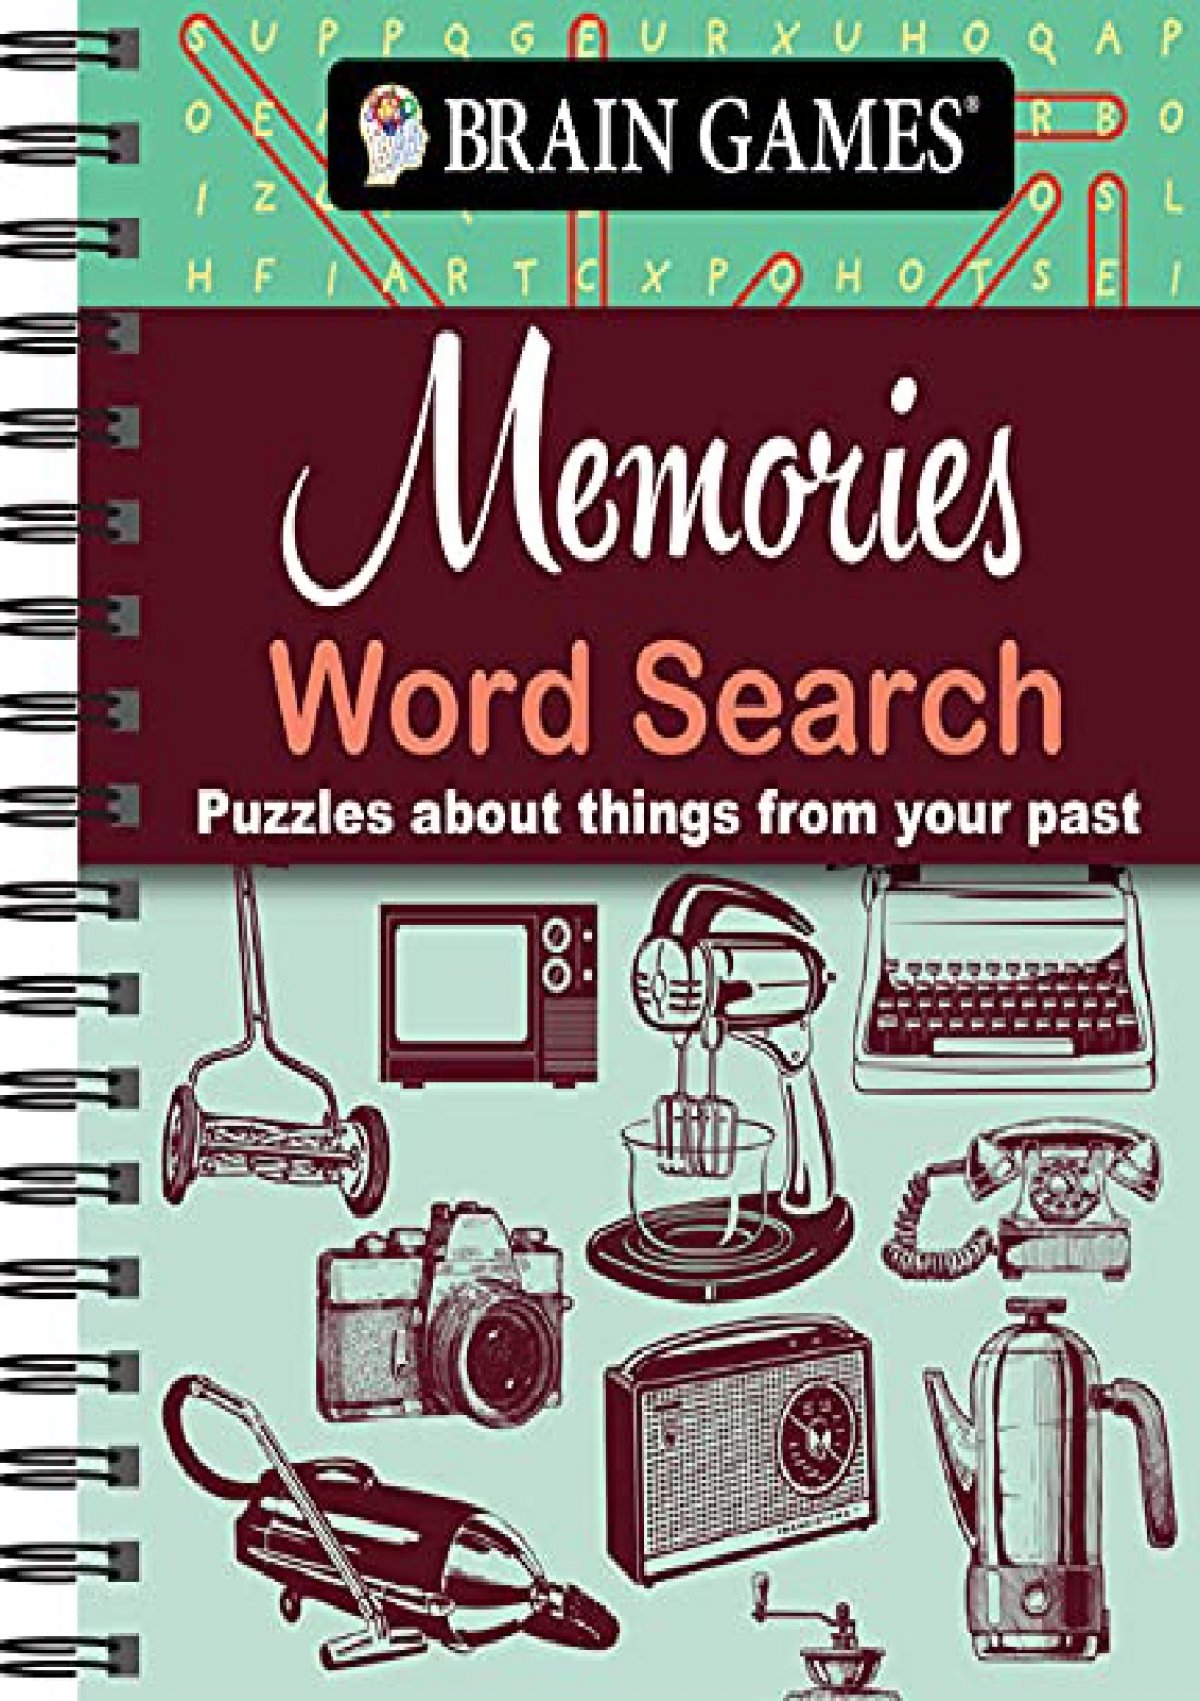 pdf-read-brain-games-memories-word-search-android